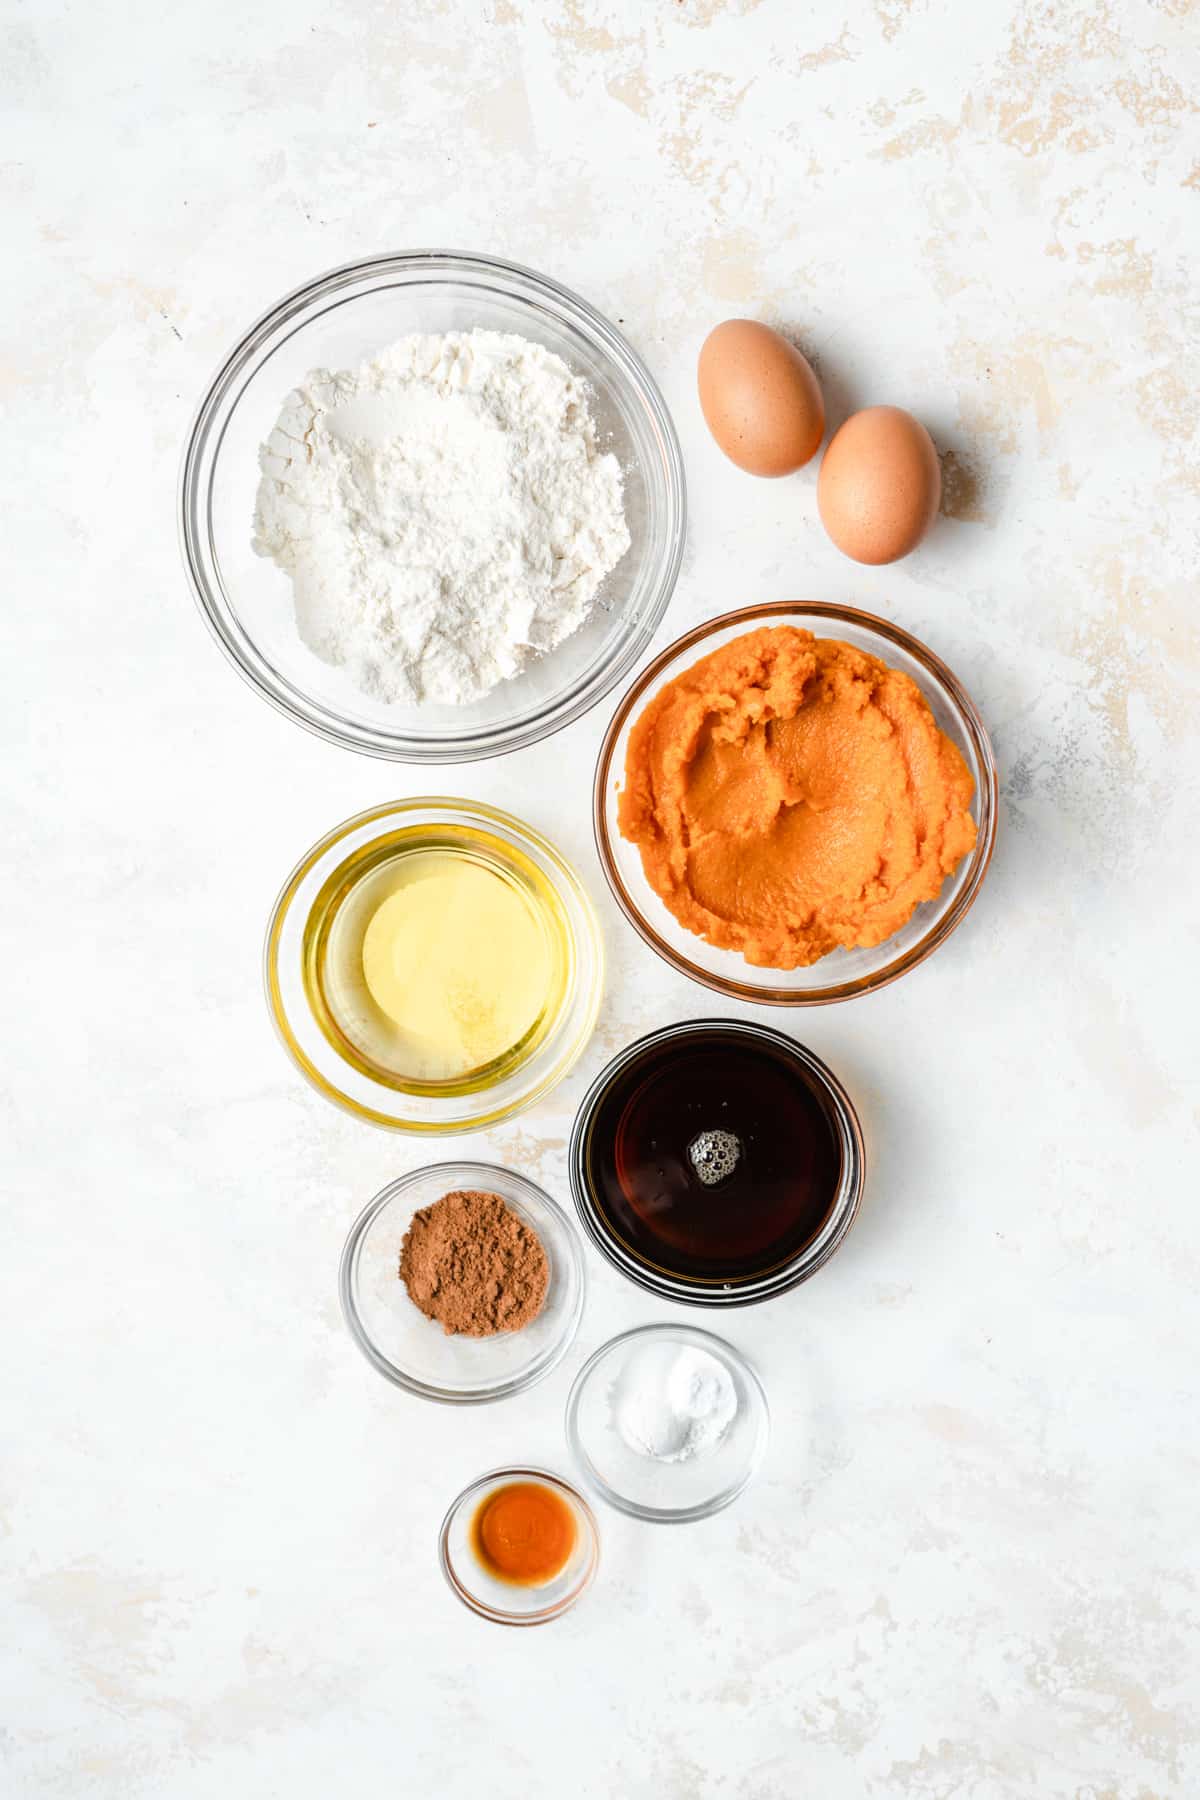 Ingredients to make a pumpkin snack cake on a white surface.